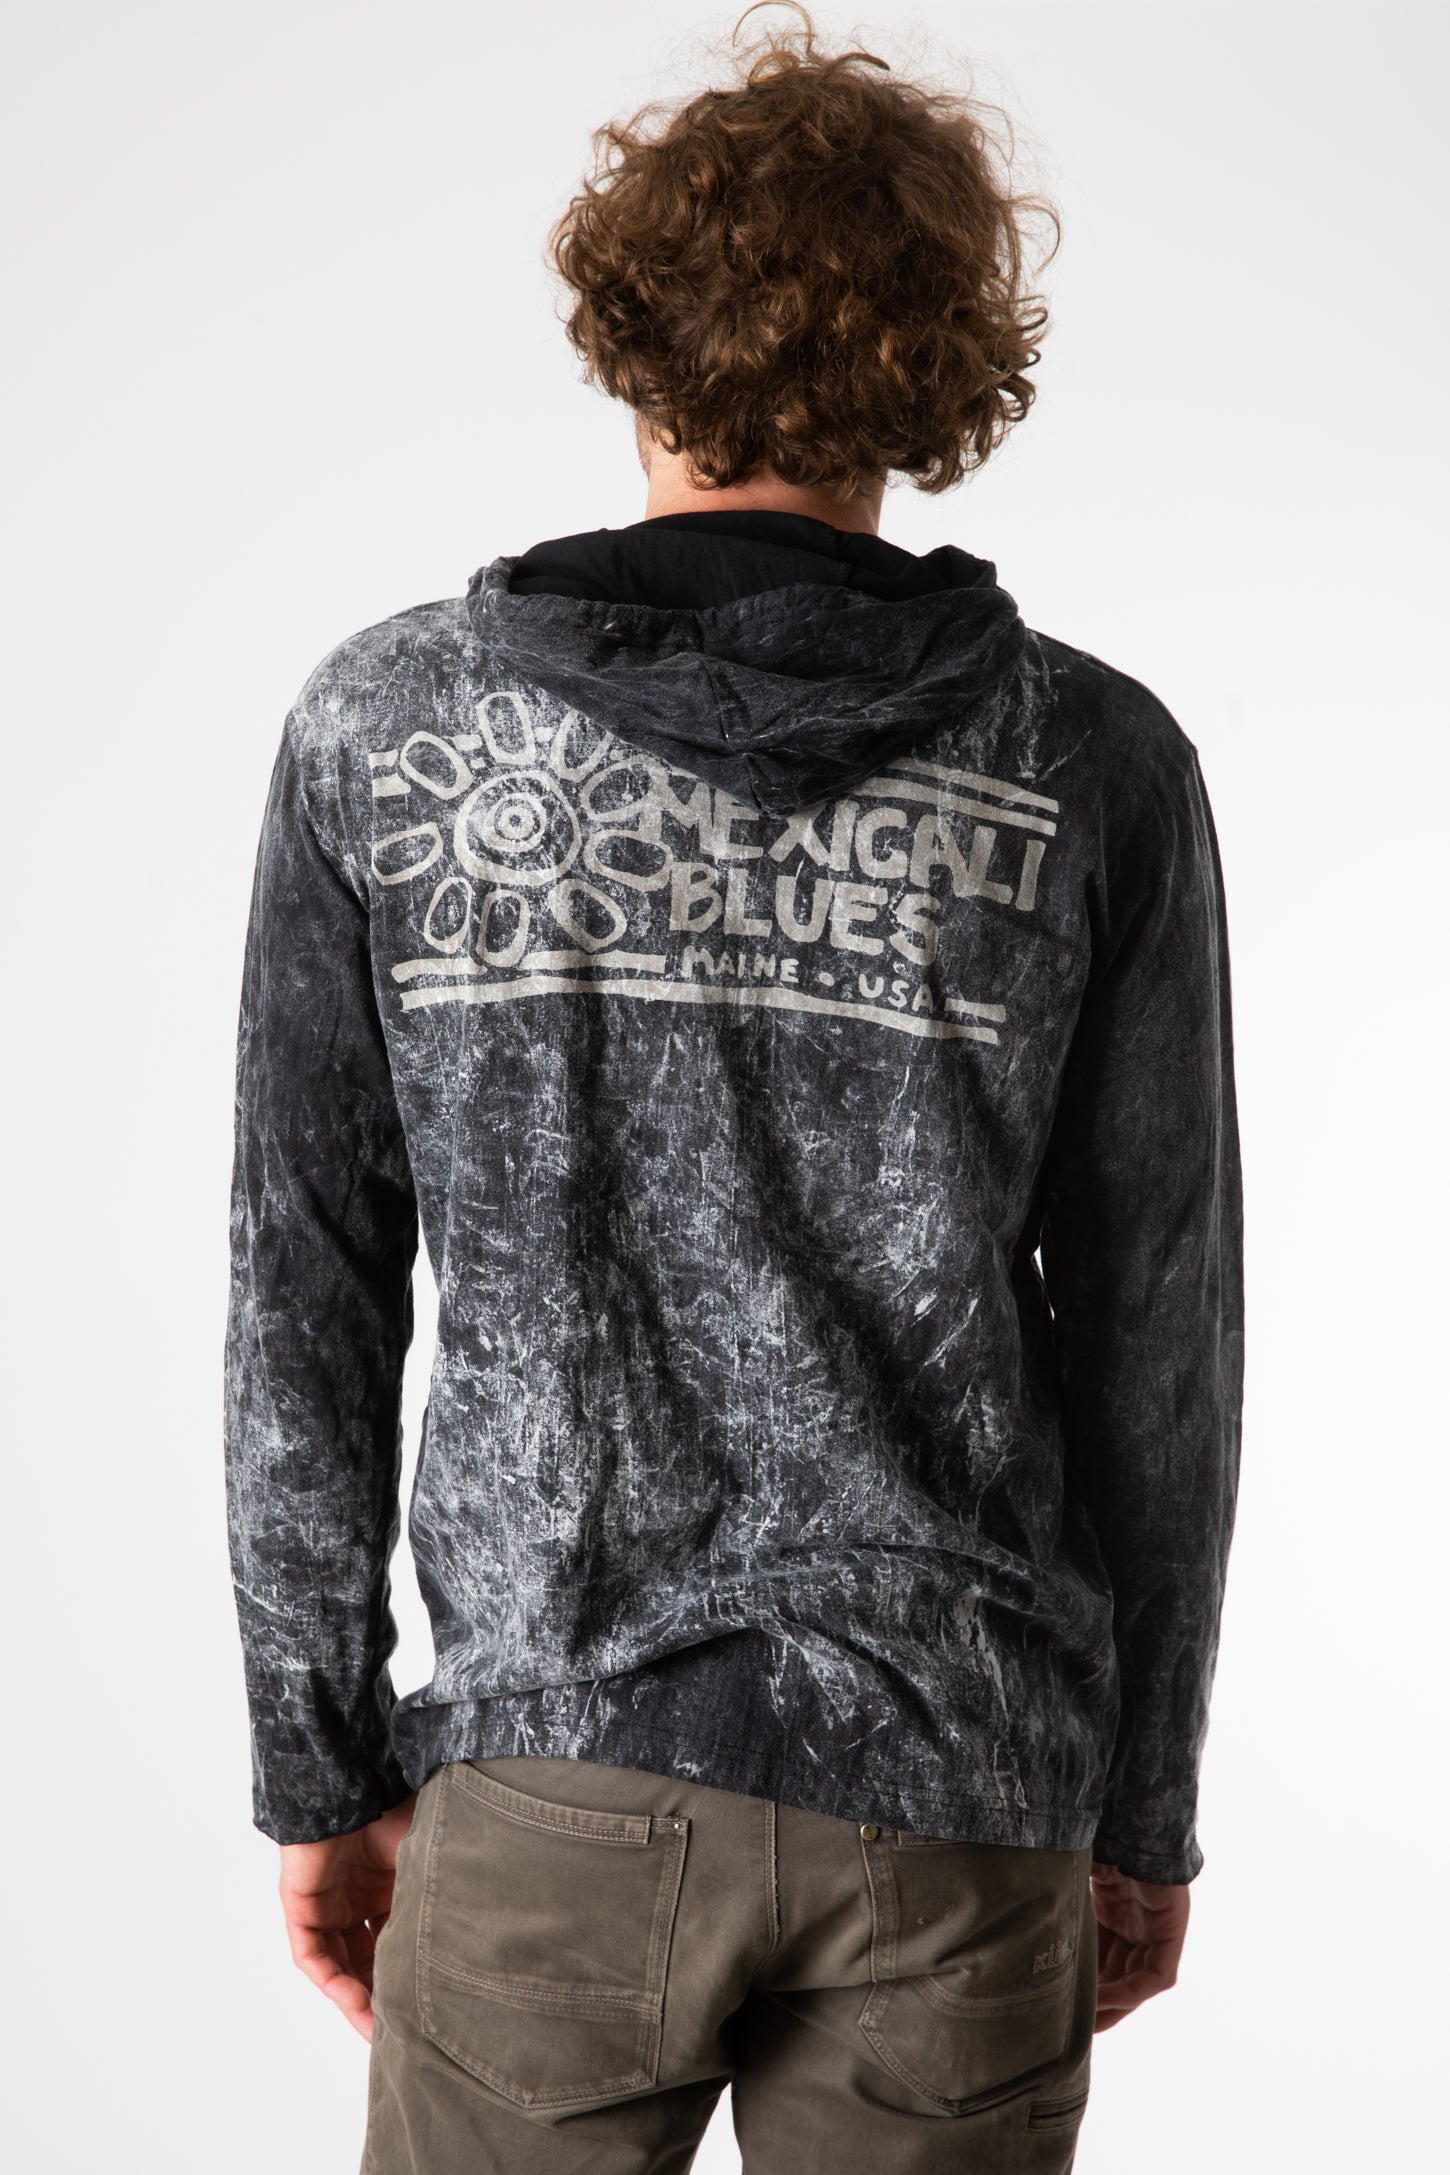 Mexicali Blues Double Take Lightweight Hoodie